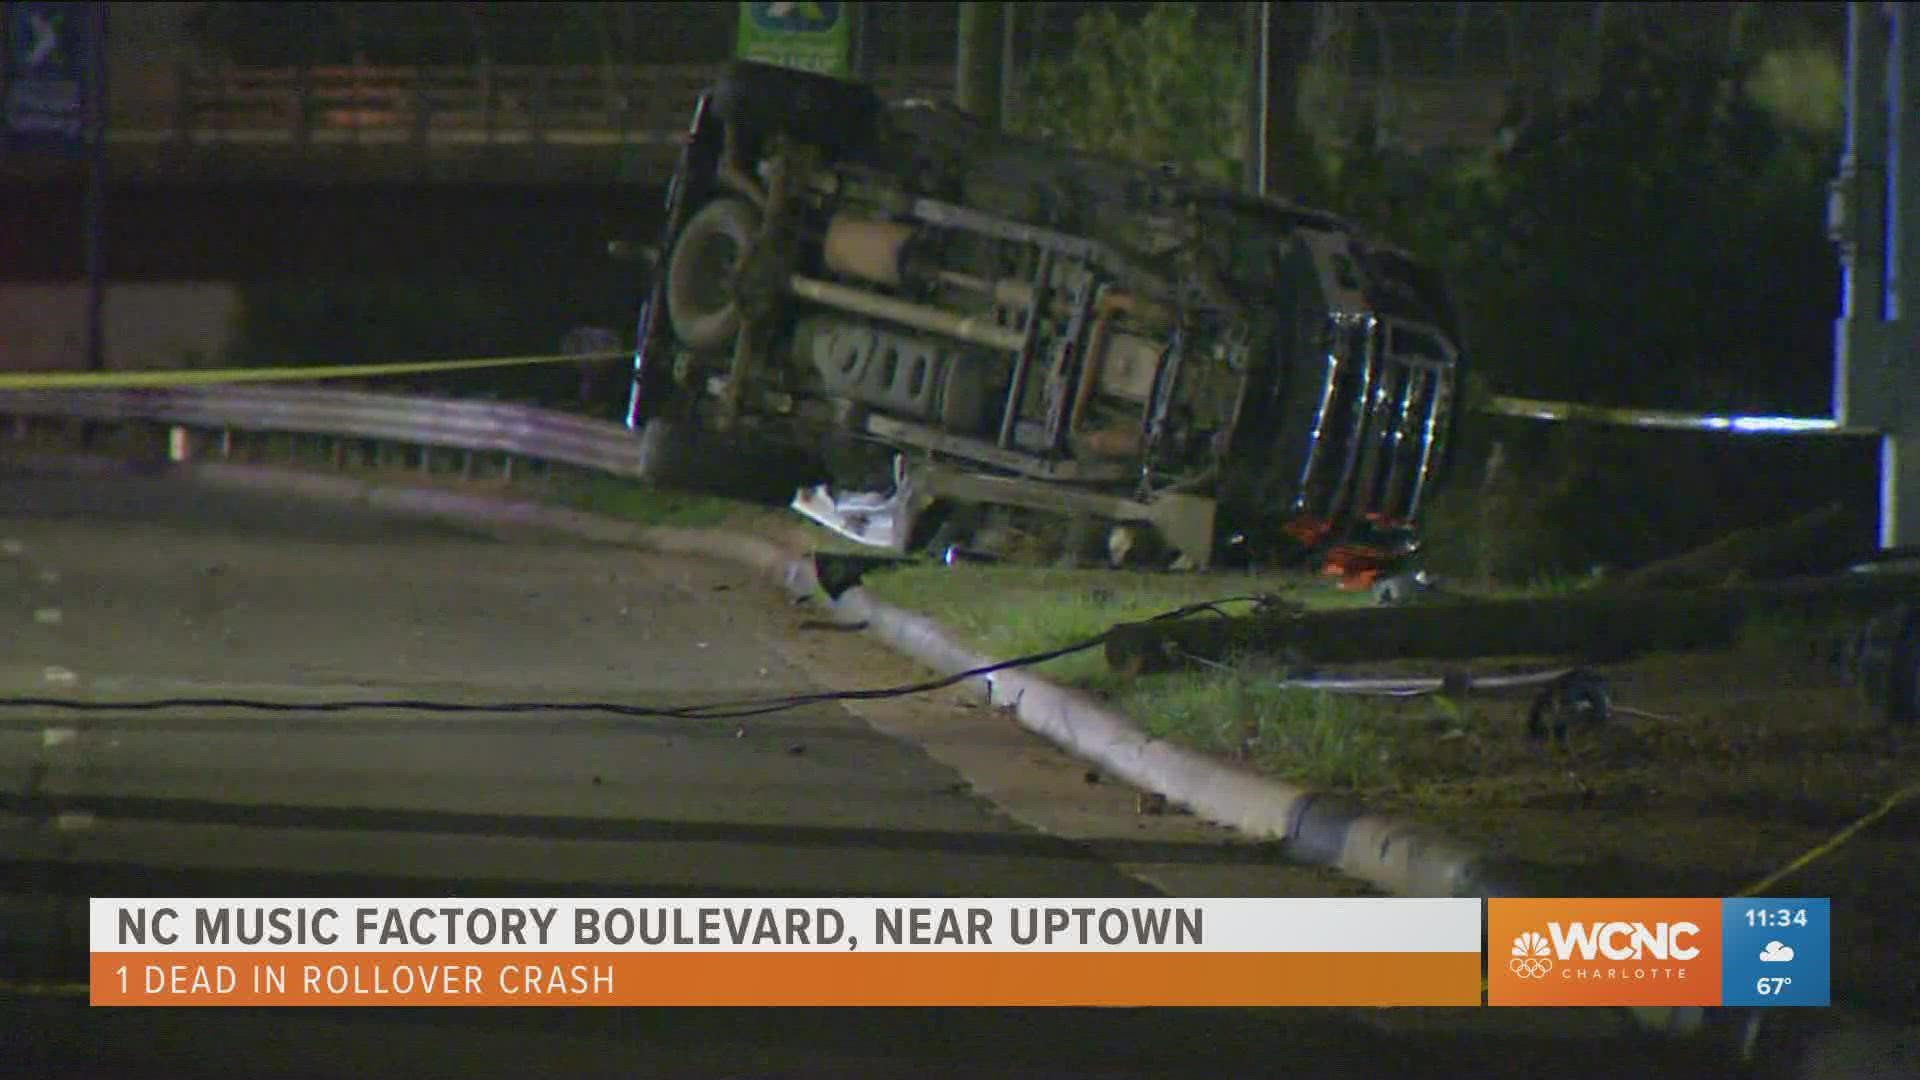 One person died after a pickup truck overturned on Music Factory Blvd., according to police.